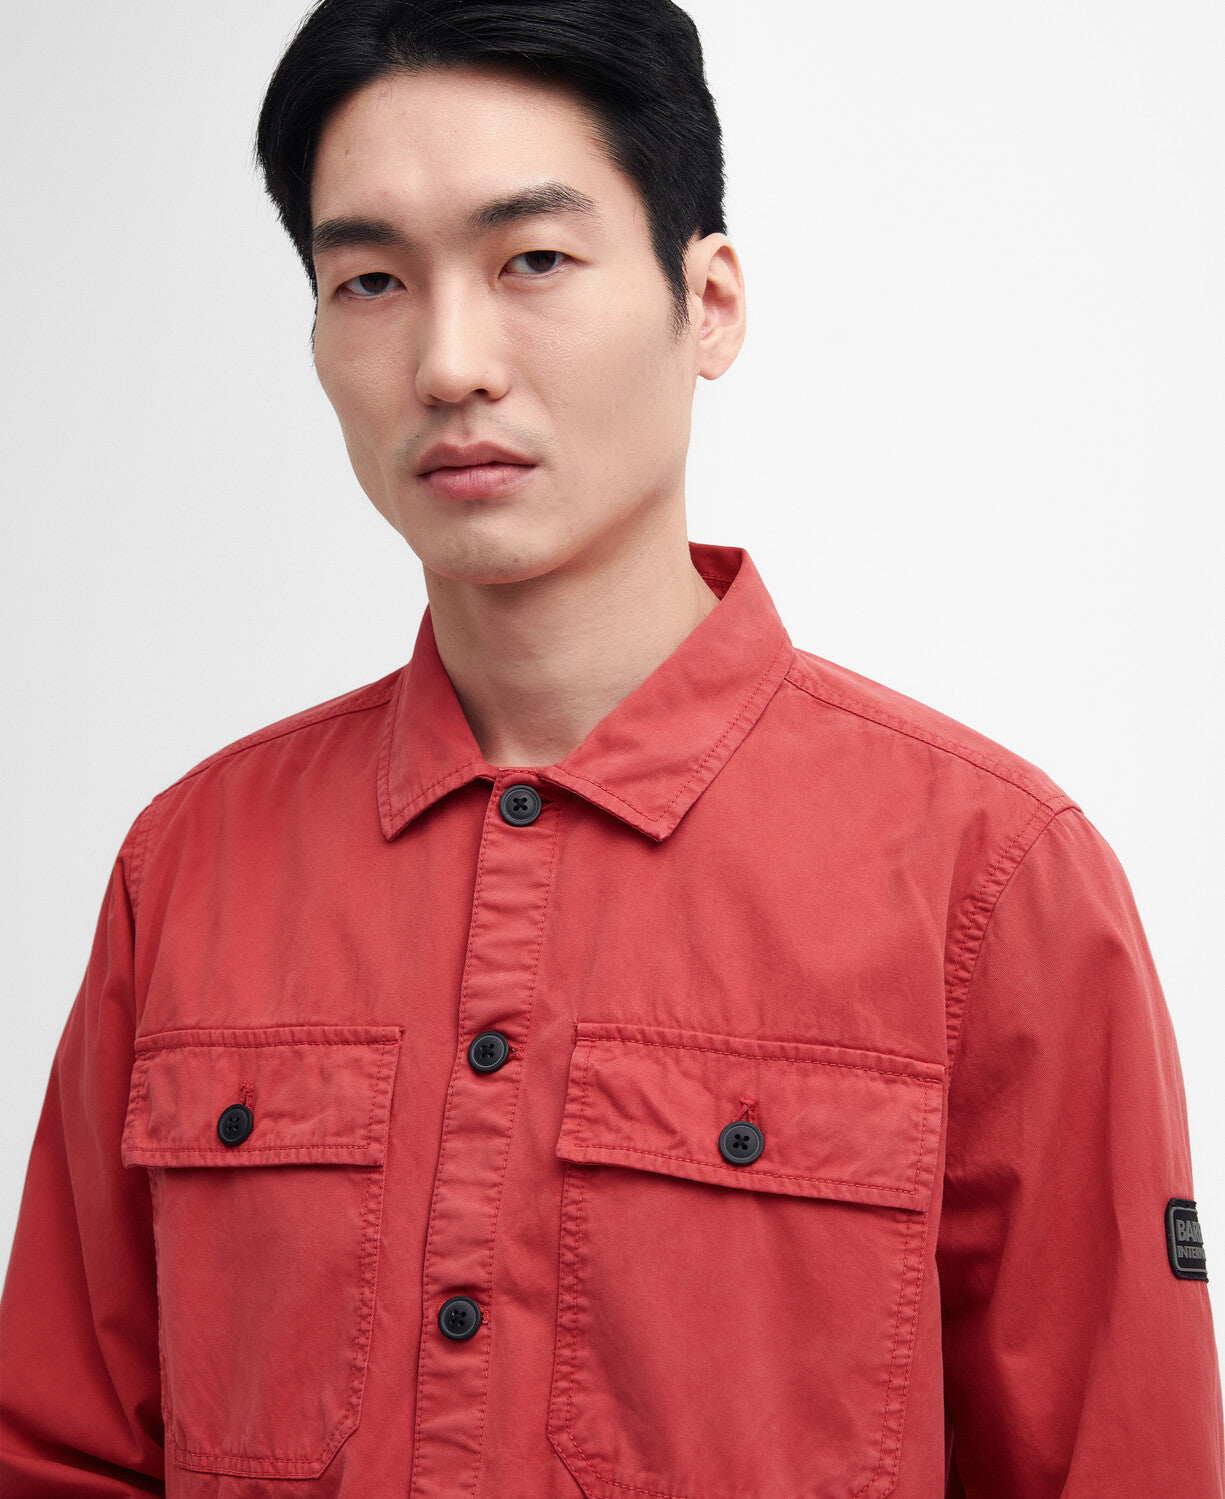 Barbour International Adey Overshirt RE45 Mineral Red